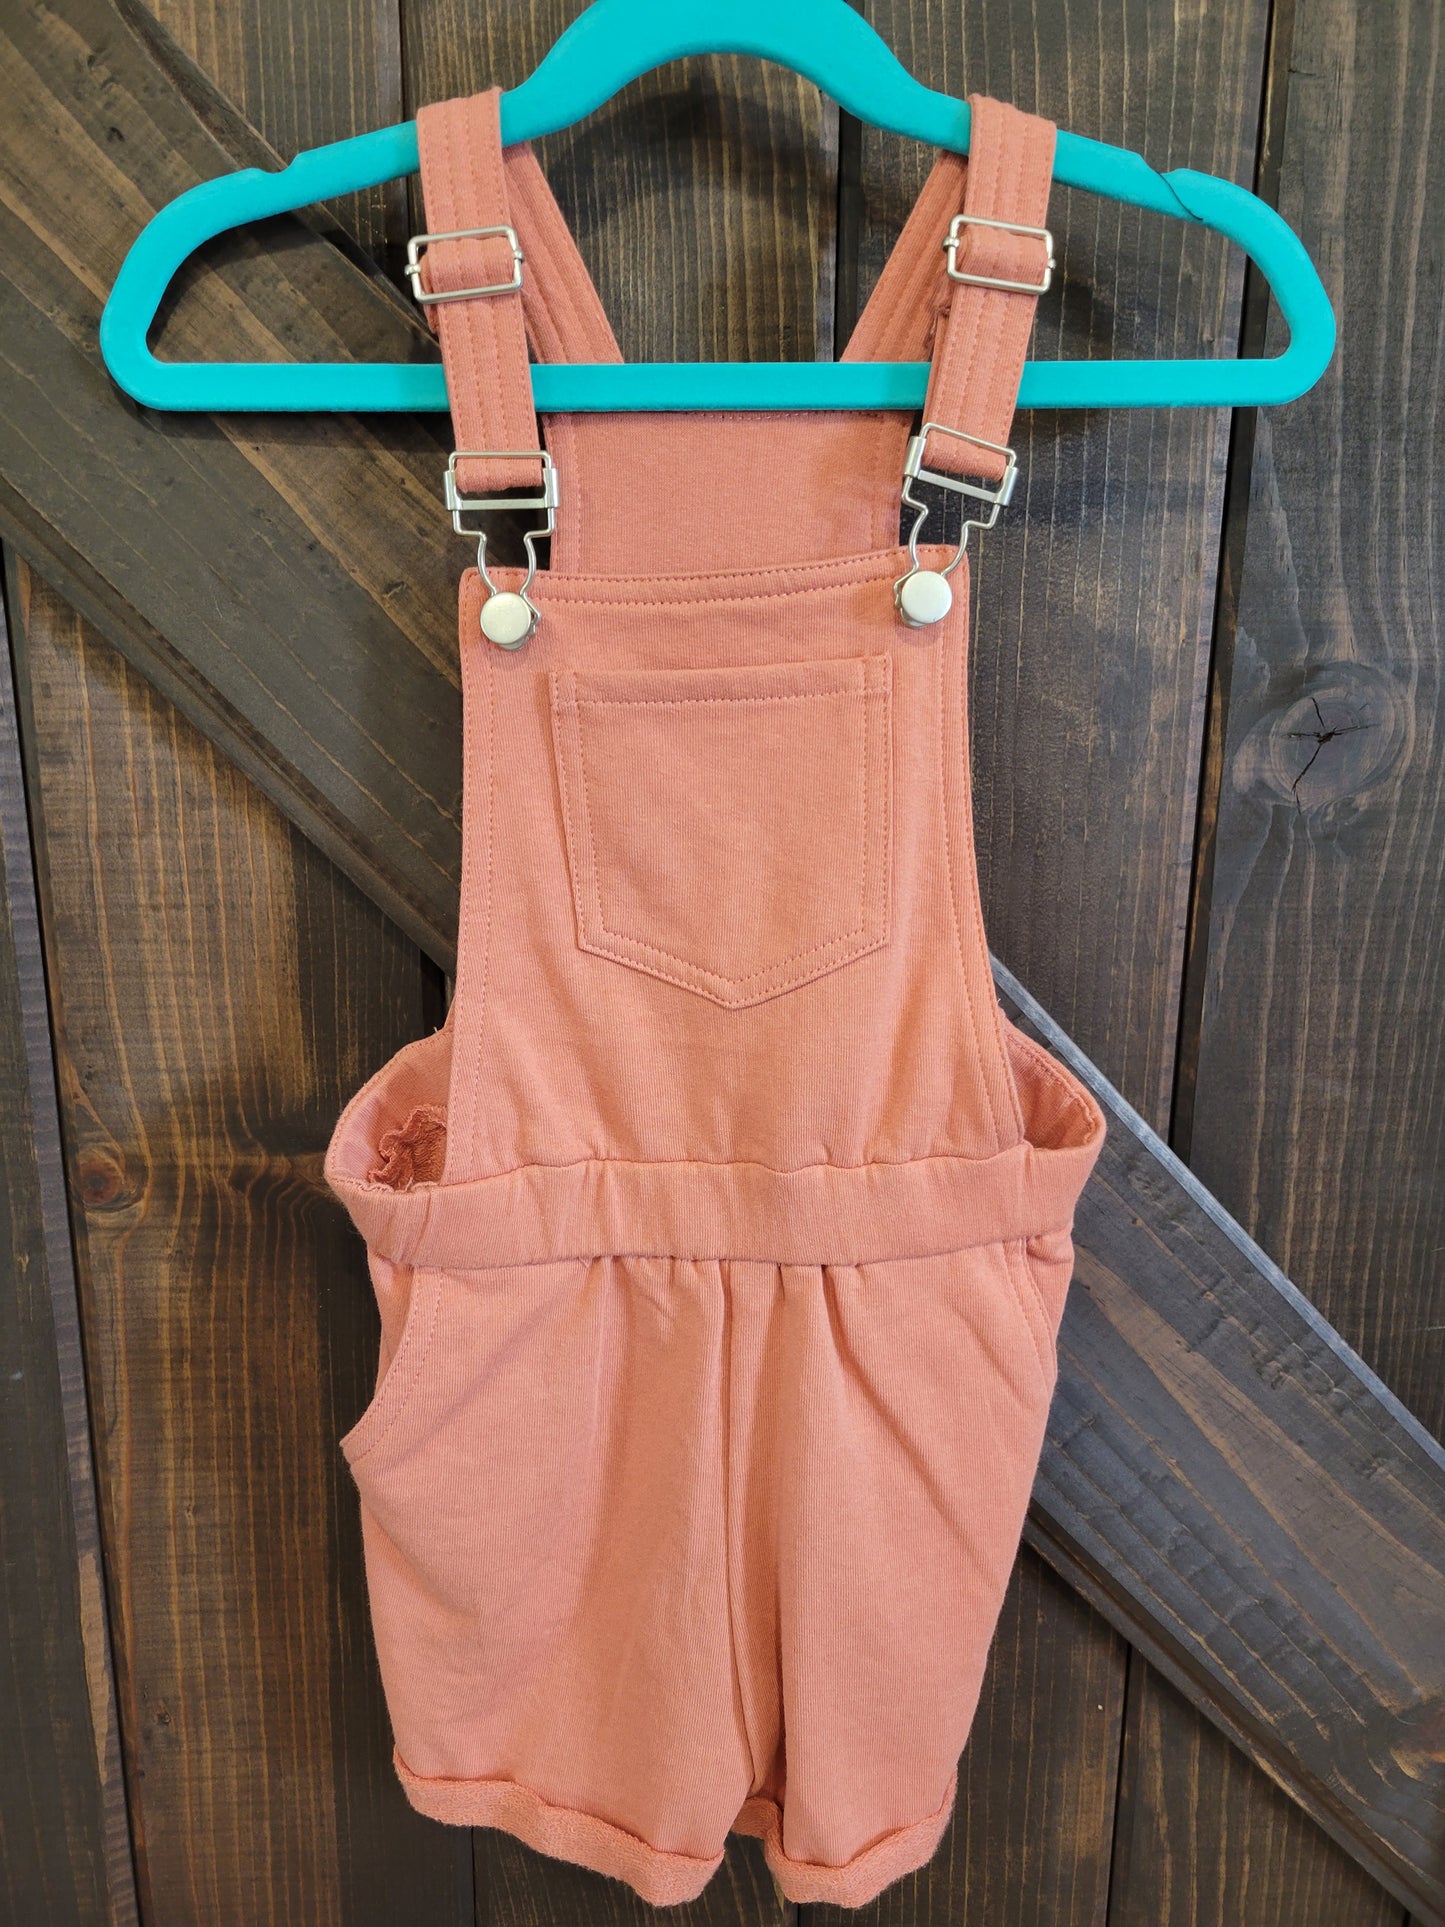 Kids Overall Shorts